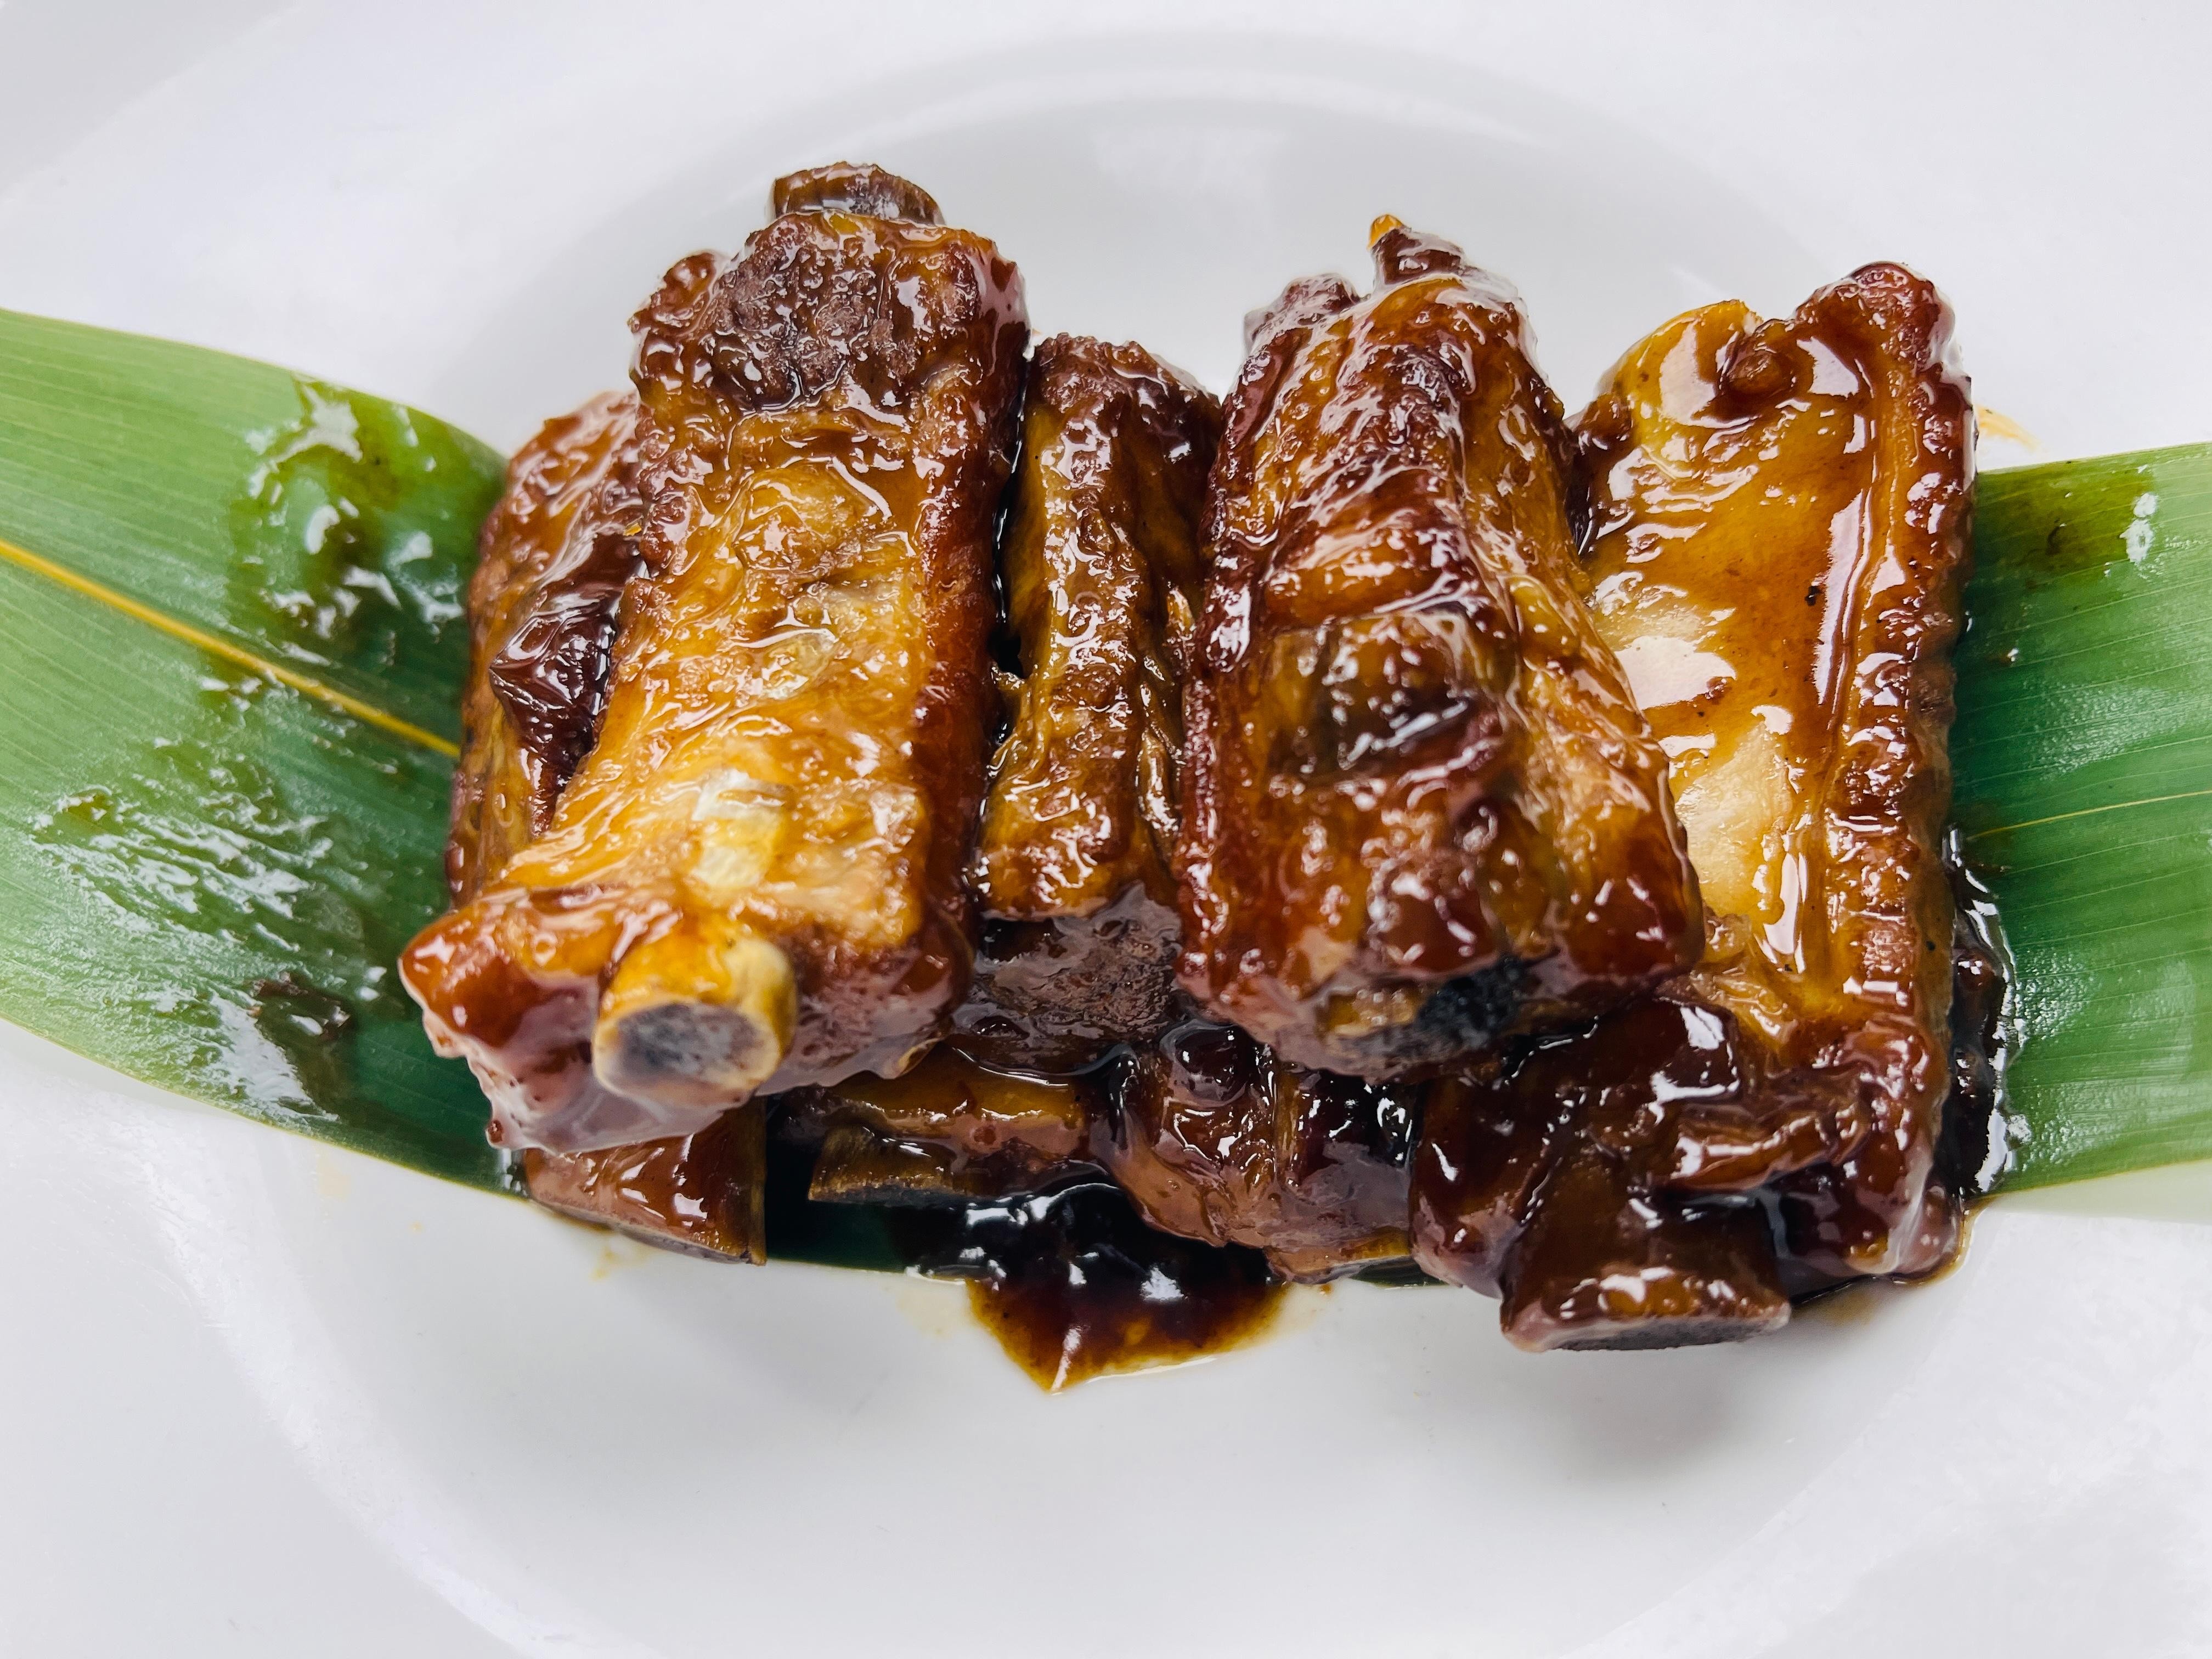 Sweet and sour Ribs 糖醋排骨